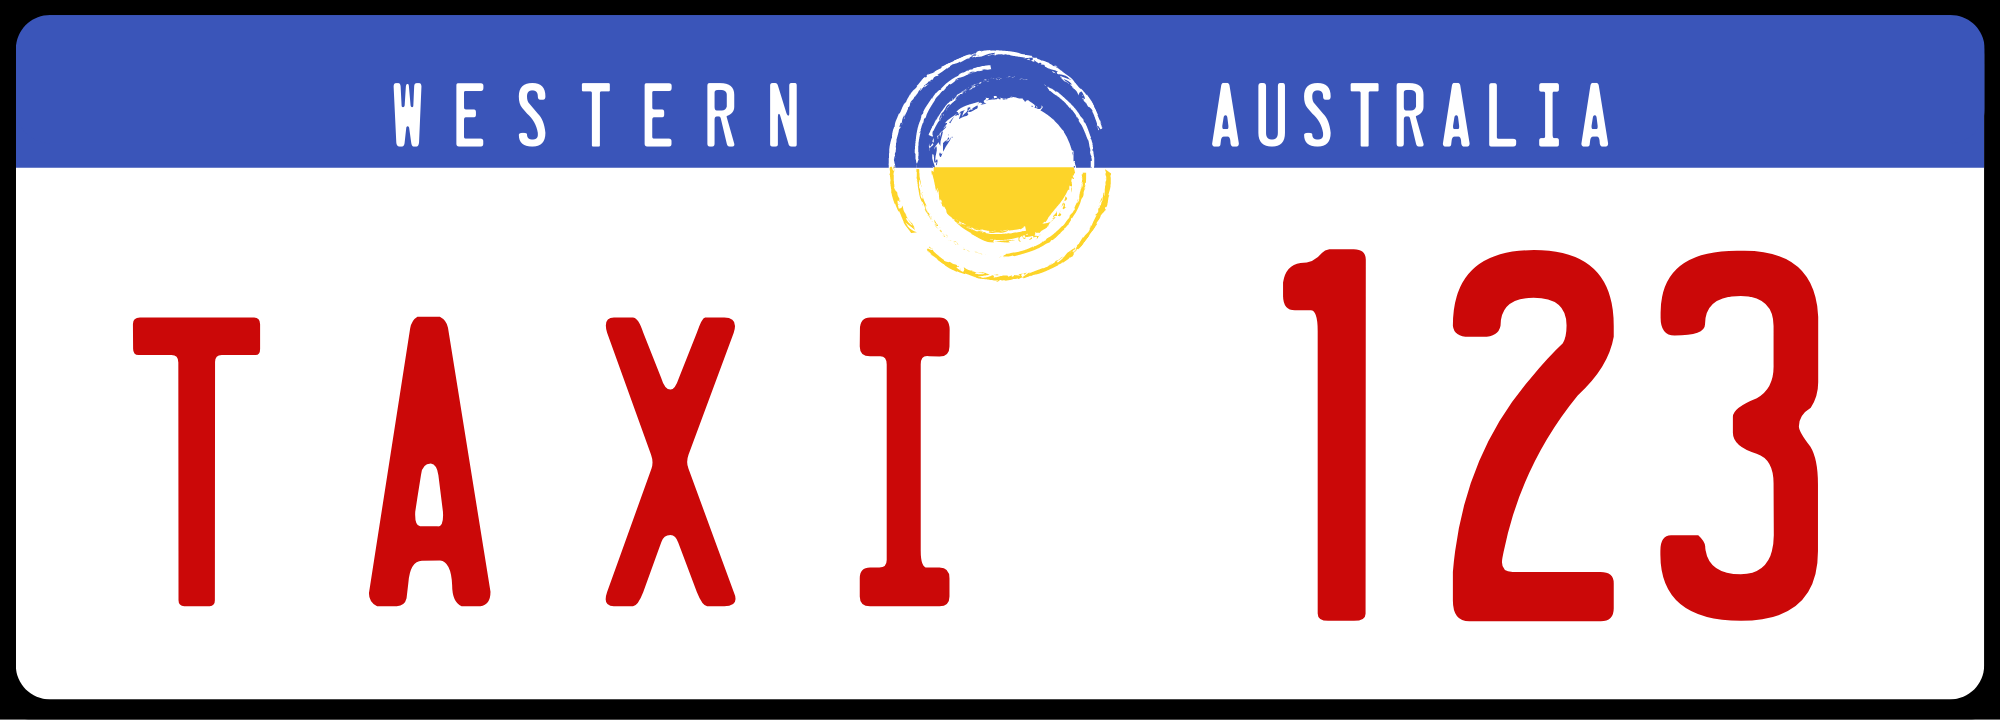 Red Taxi plate illustration